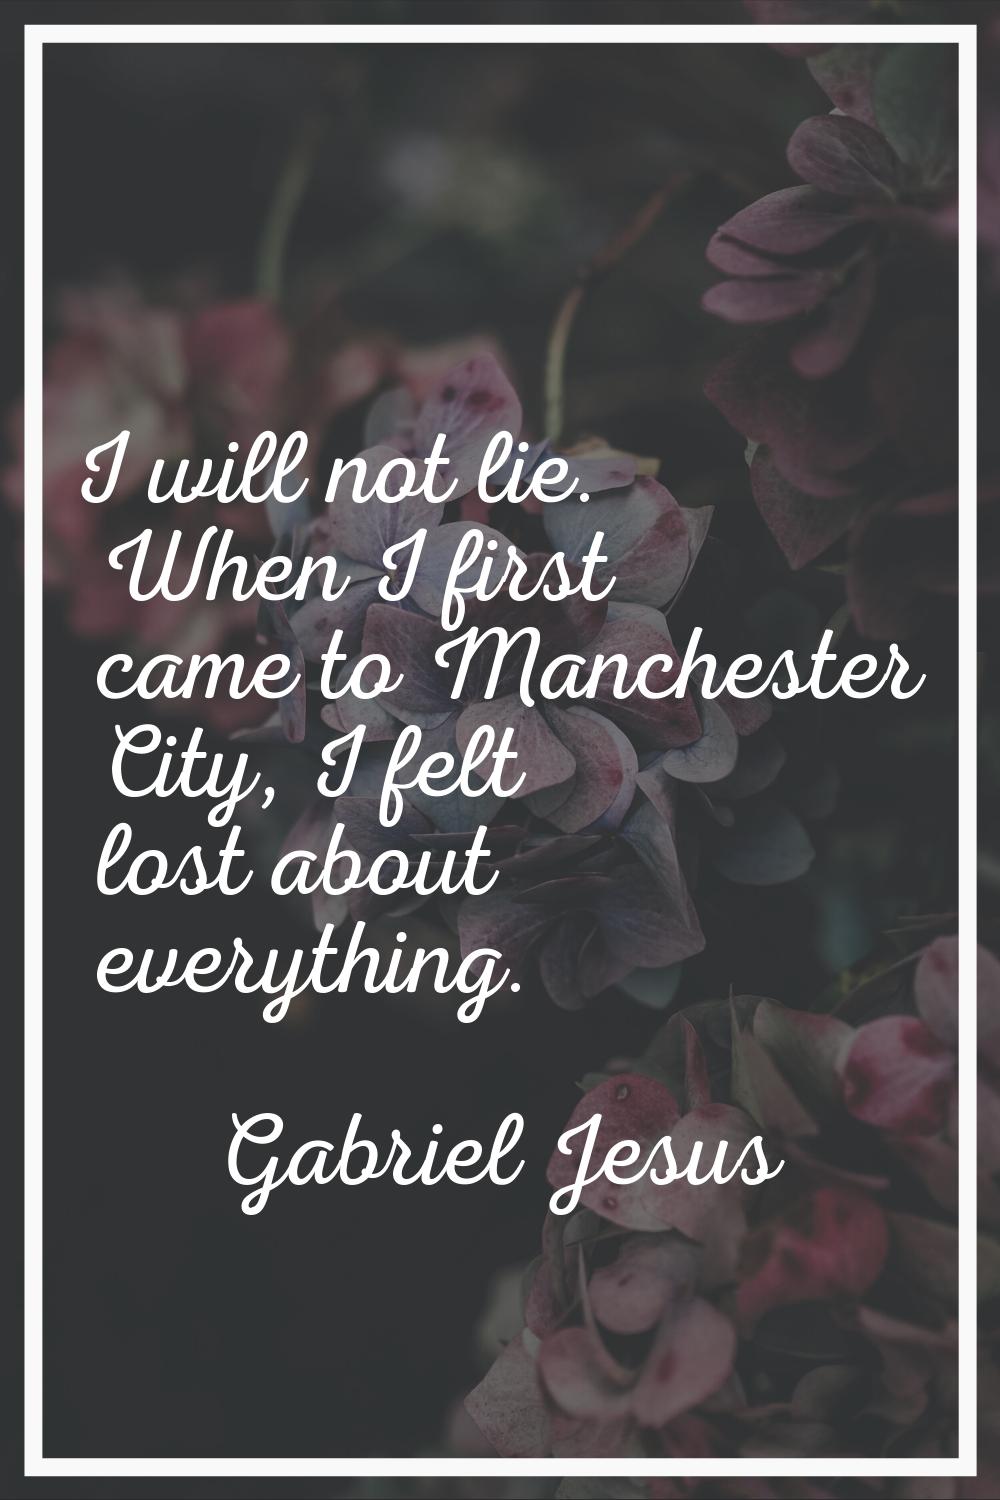 I will not lie. When I first came to Manchester City, I felt lost about everything.